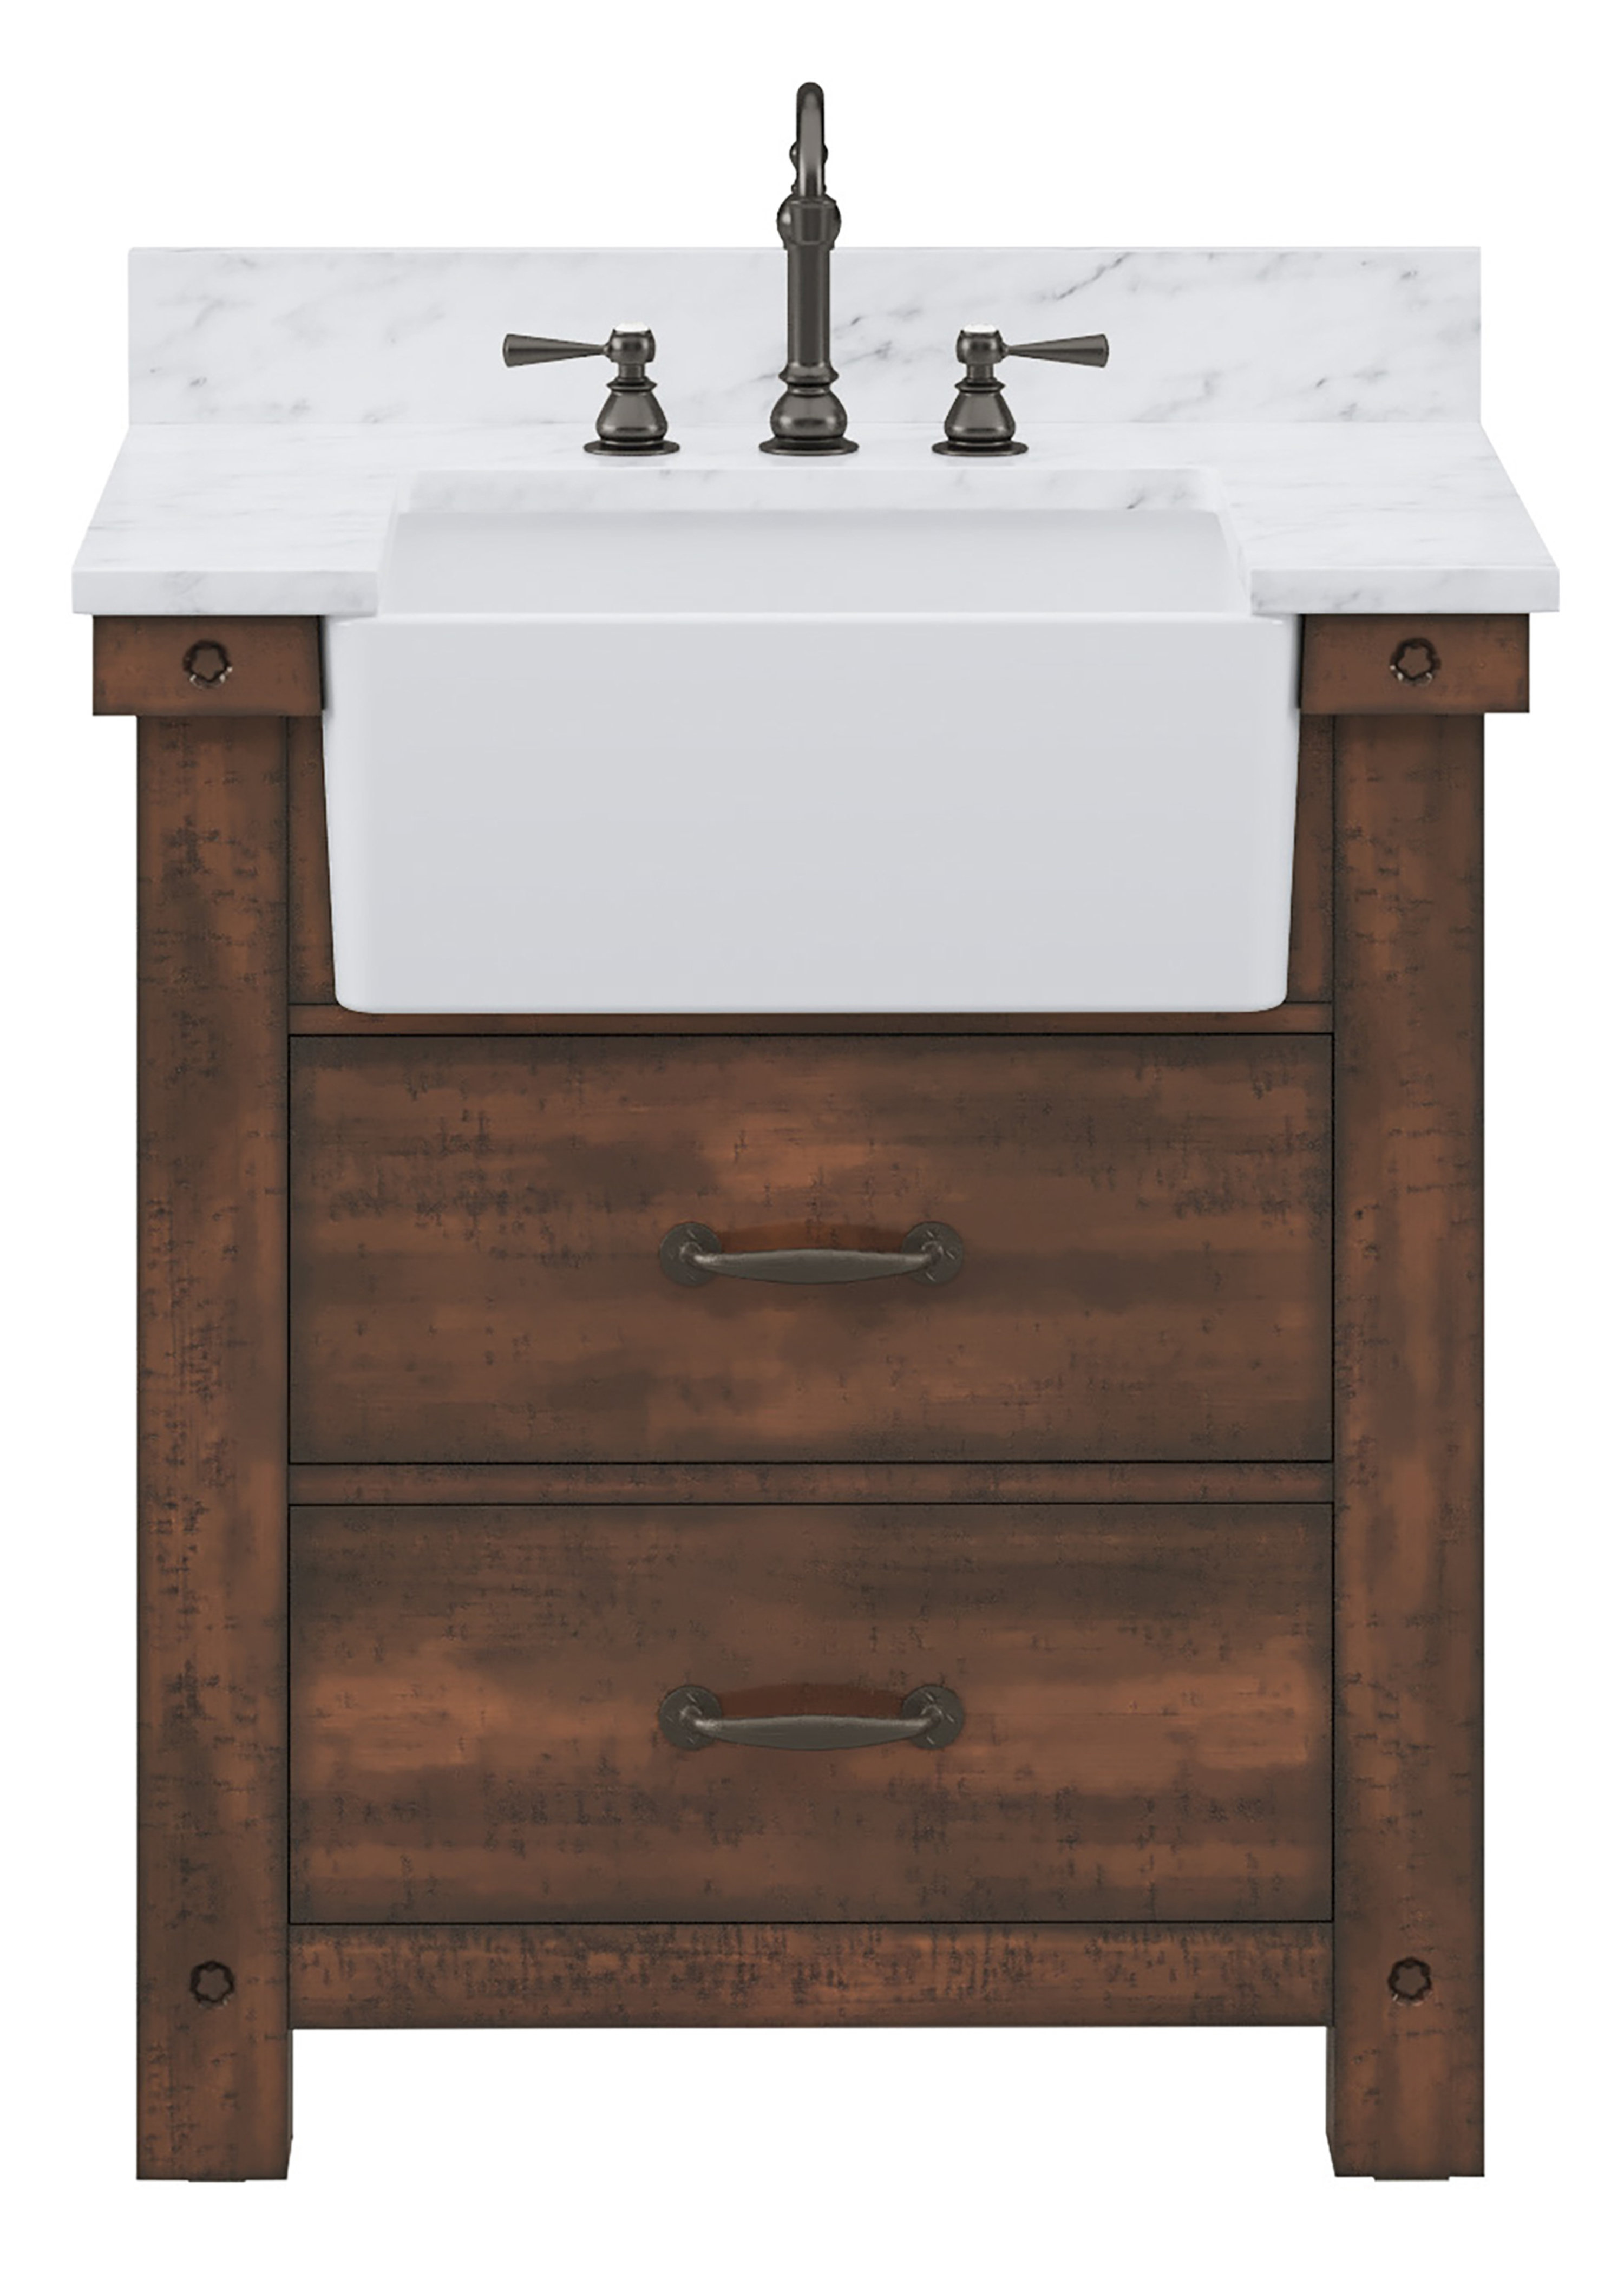 30" Single Sink Carrara White Marble Countertop Vanity in Rustic Sienna with Mirror and Faucet Options